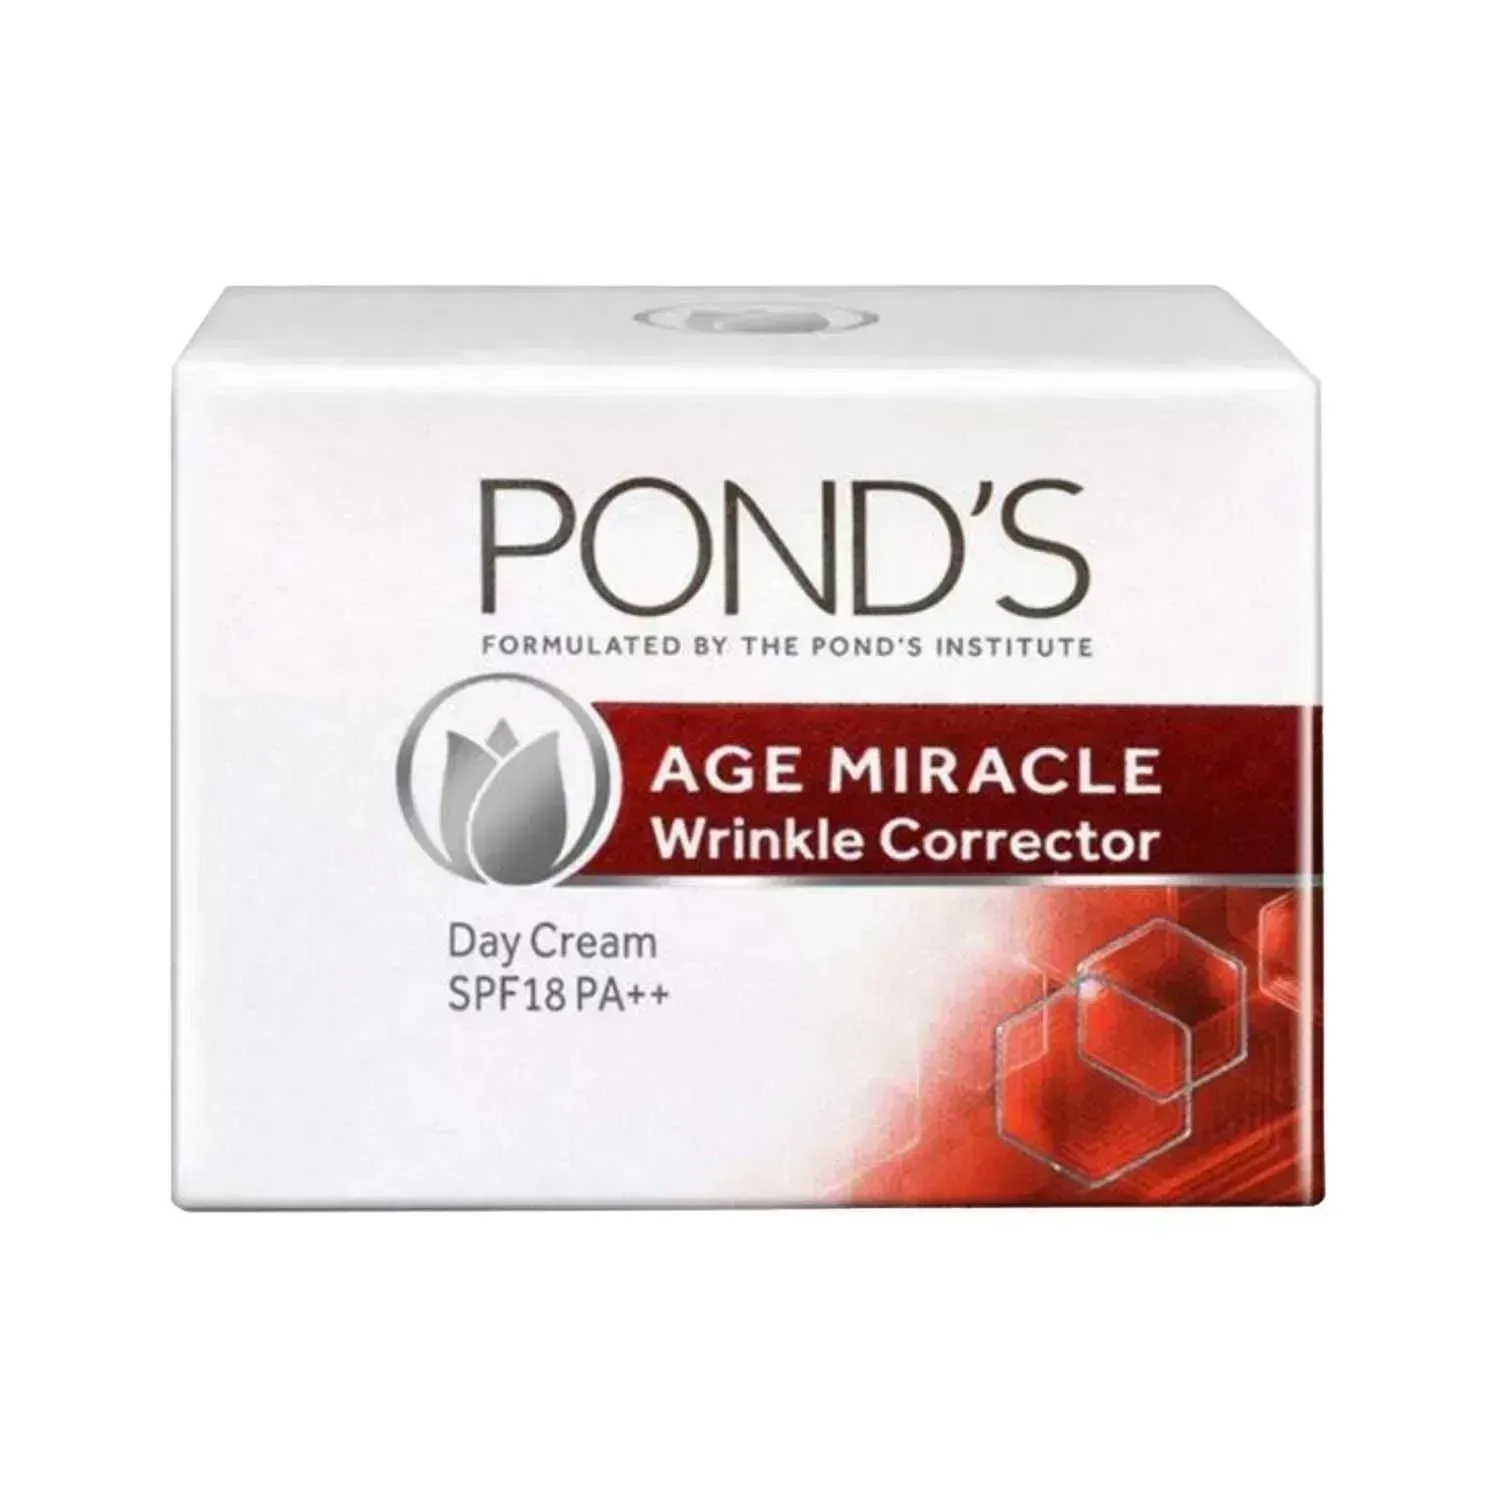 Pond's | Pond's Age Miracle Wrinkle Corrector Day Cream SPF 18 Pa++ - (10g)